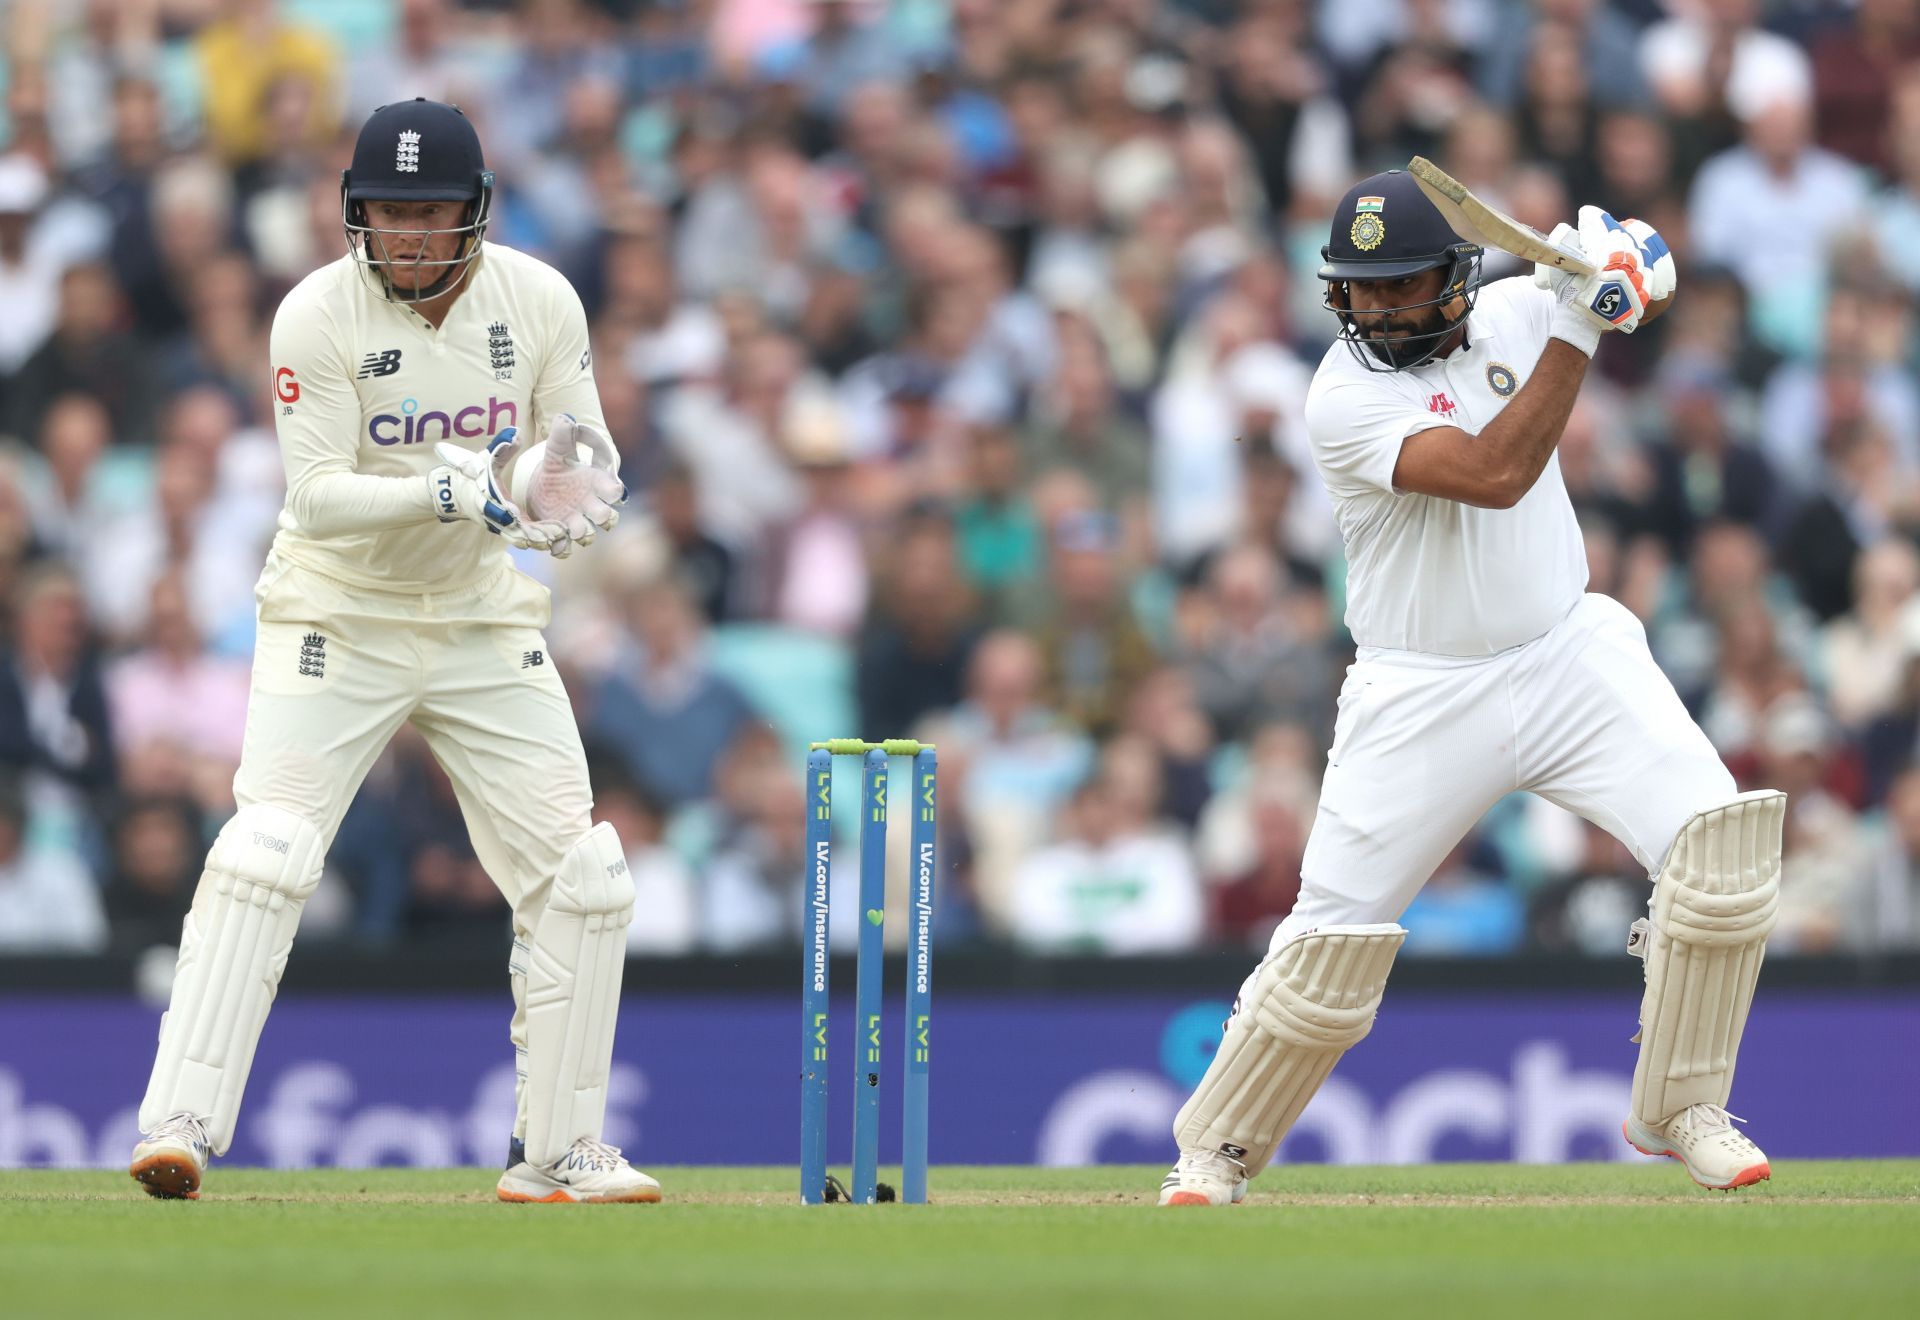 The Indian batter compiled a wonderful hundred at The Oval. (Pic: Getty Images)